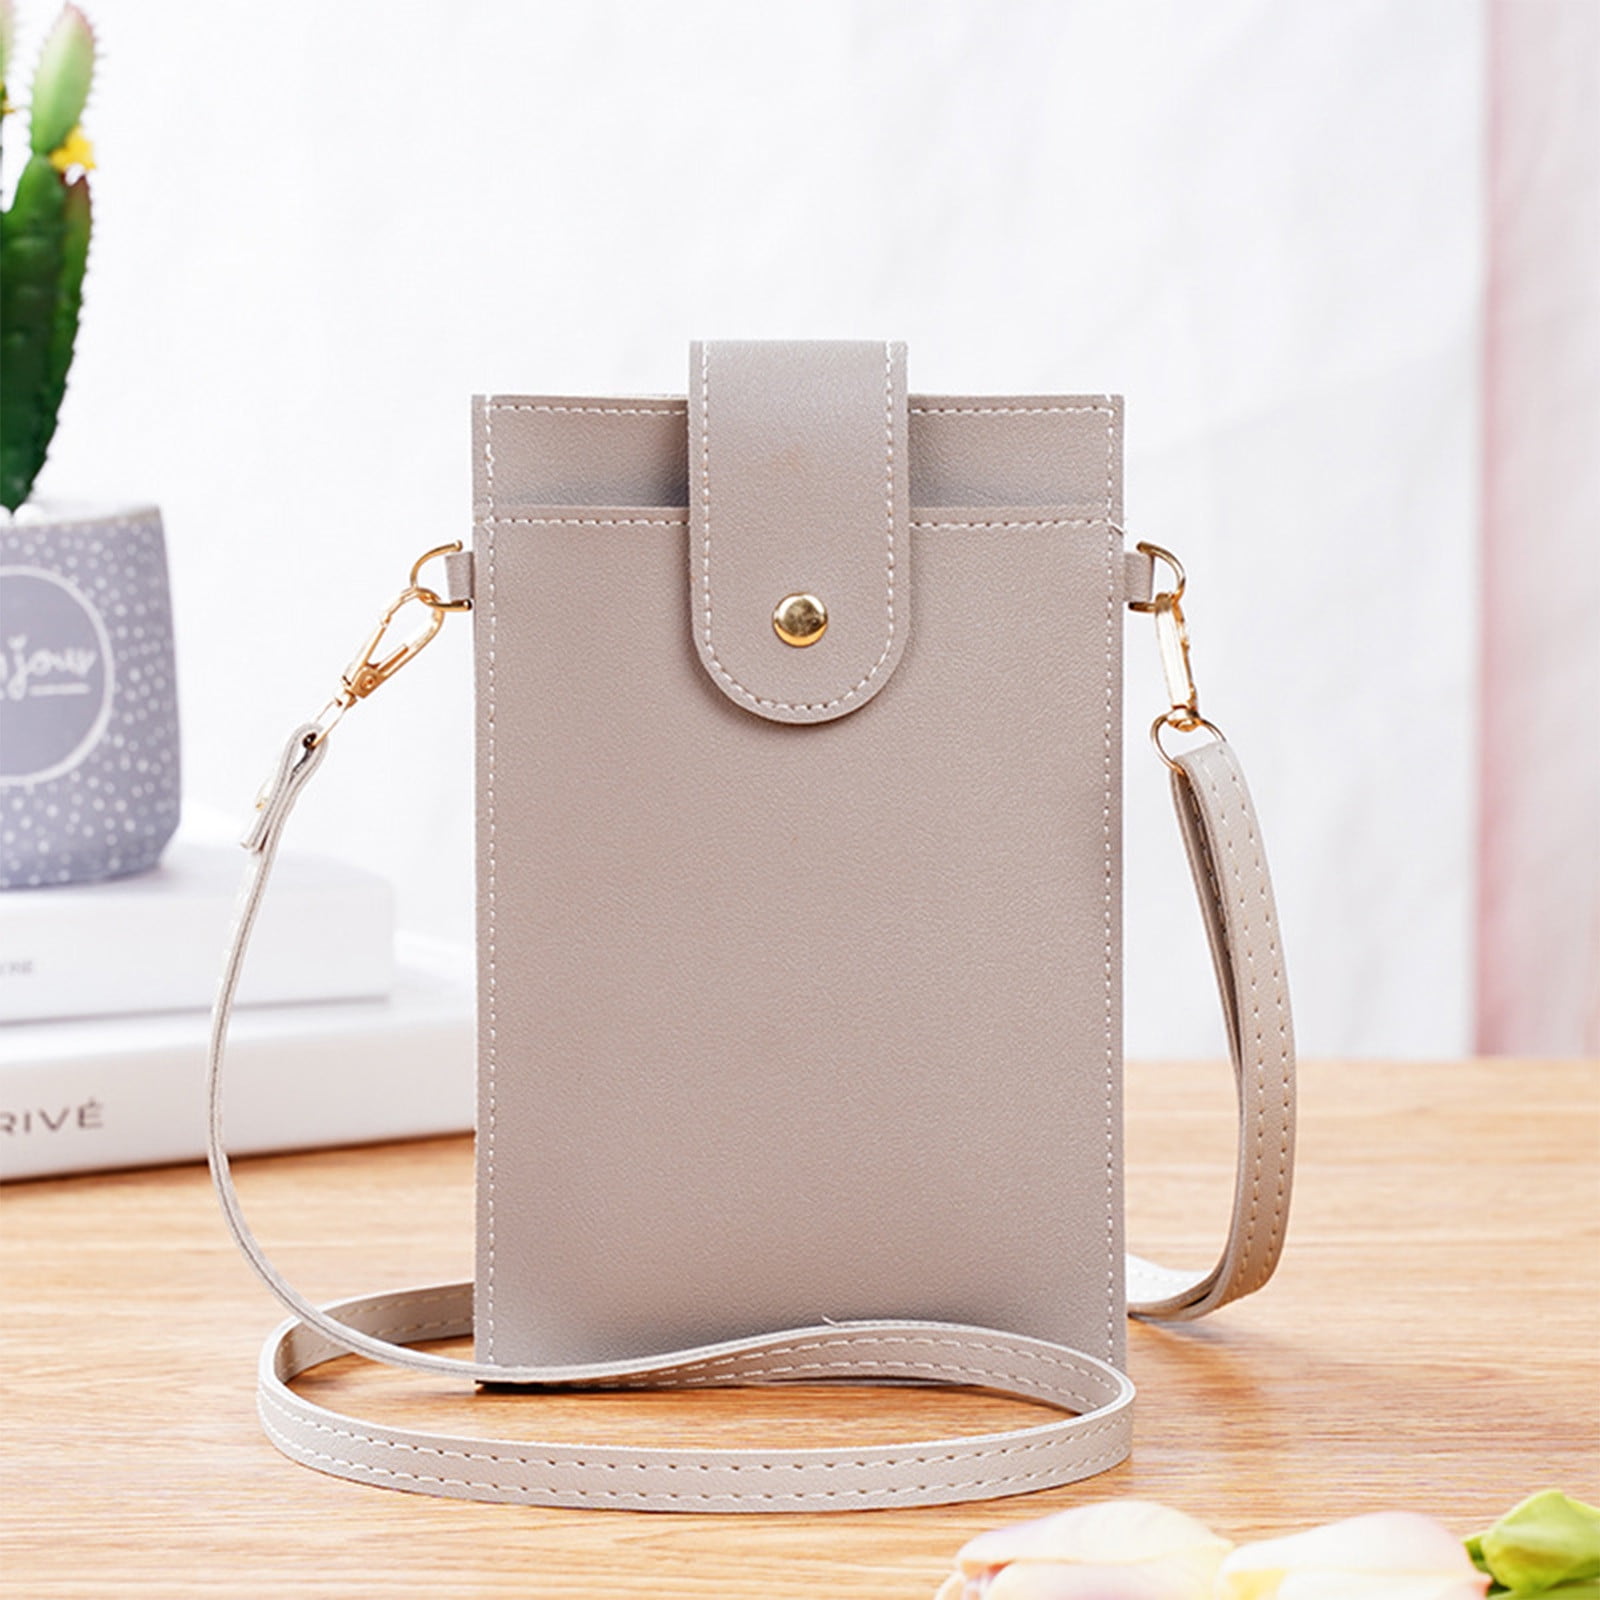 Touch Screen Purse by Lori Greiner Fits Most Smartphones – Stylish  Crossbody with Shoulder Strap -RFID Keeps Cash, Credit Cards, Phone Screens  Safe - Walmart.com